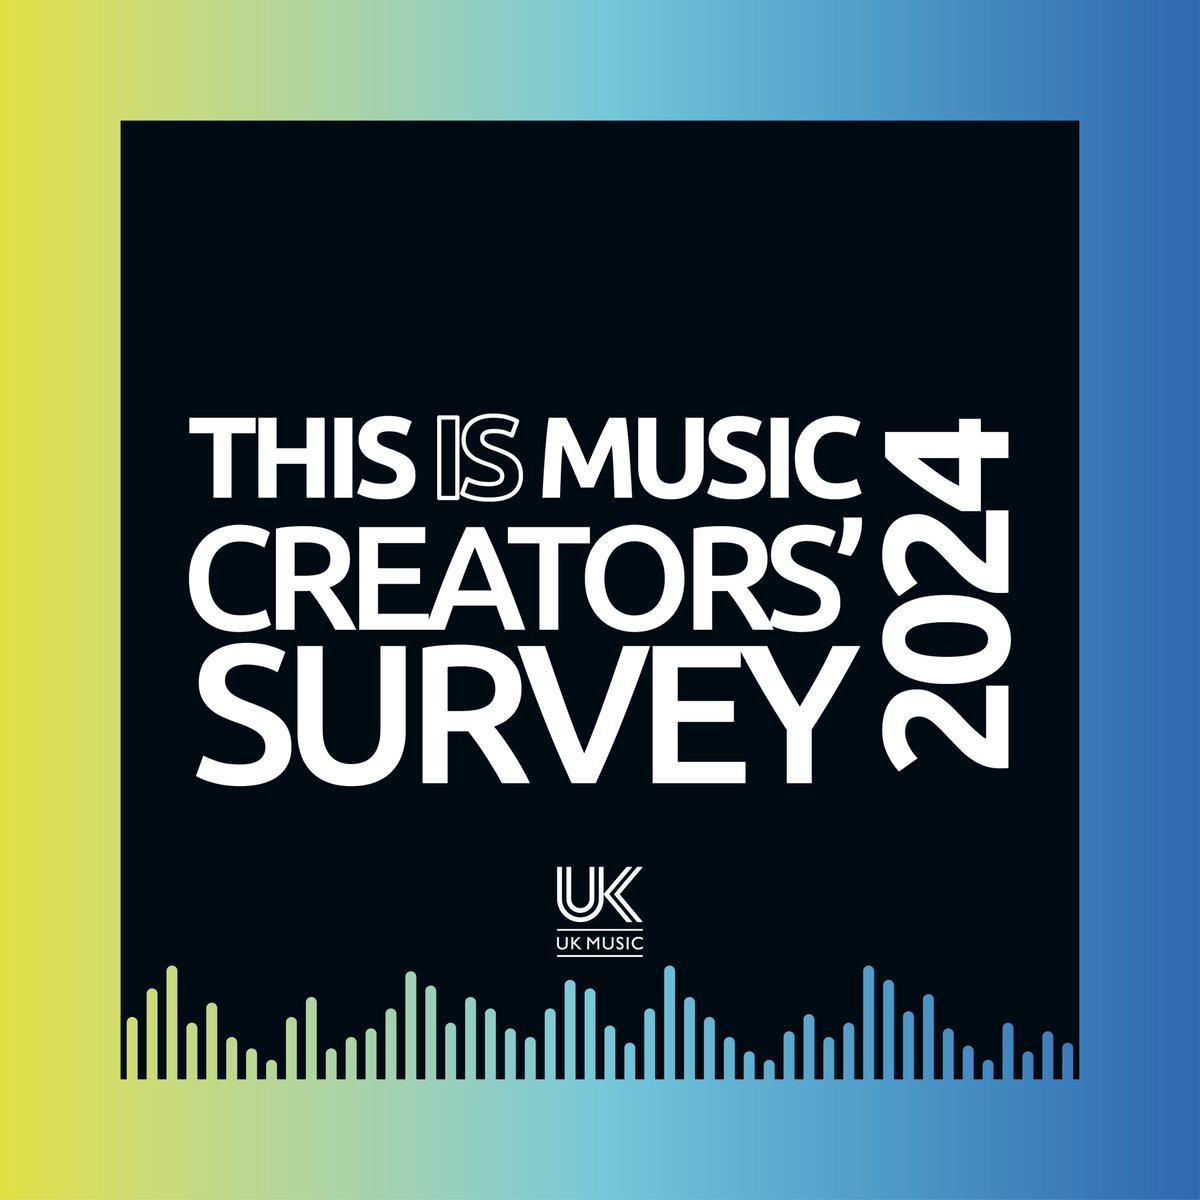 ICYMI: Are you an #artist, #musician, #composer, #songwriter, #lyricist, #singer, #producer or #engineer? @UK_Music need you to contribute to their annual #ThisIsMusic Creators’ Survey. Fill out the survey and you could win a £100 voucher. Take part here -…